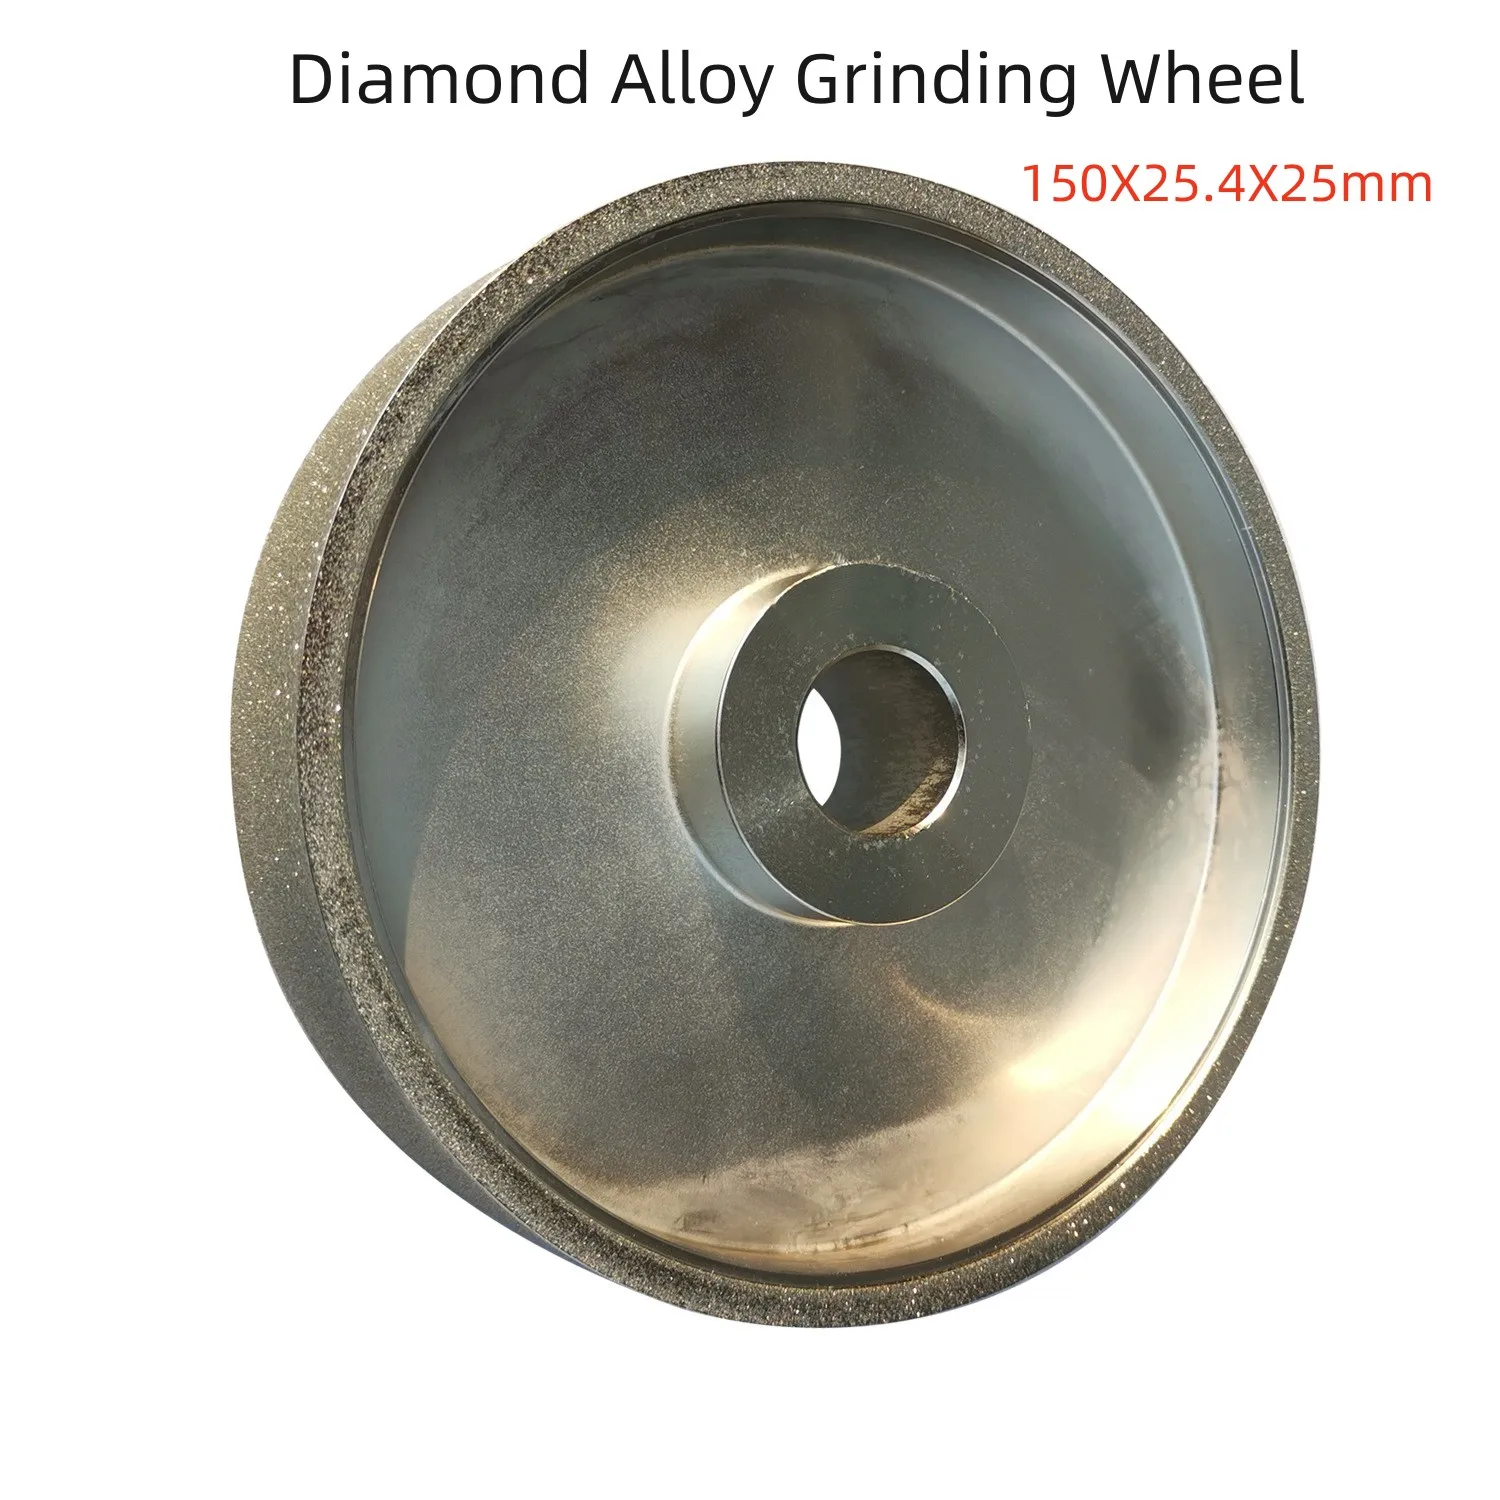 Electroplate Coated Diamond Grinding Wheel Flat-Shaped Metal Base 150x25.4x25mm For Tungsten Stone Tile Glass